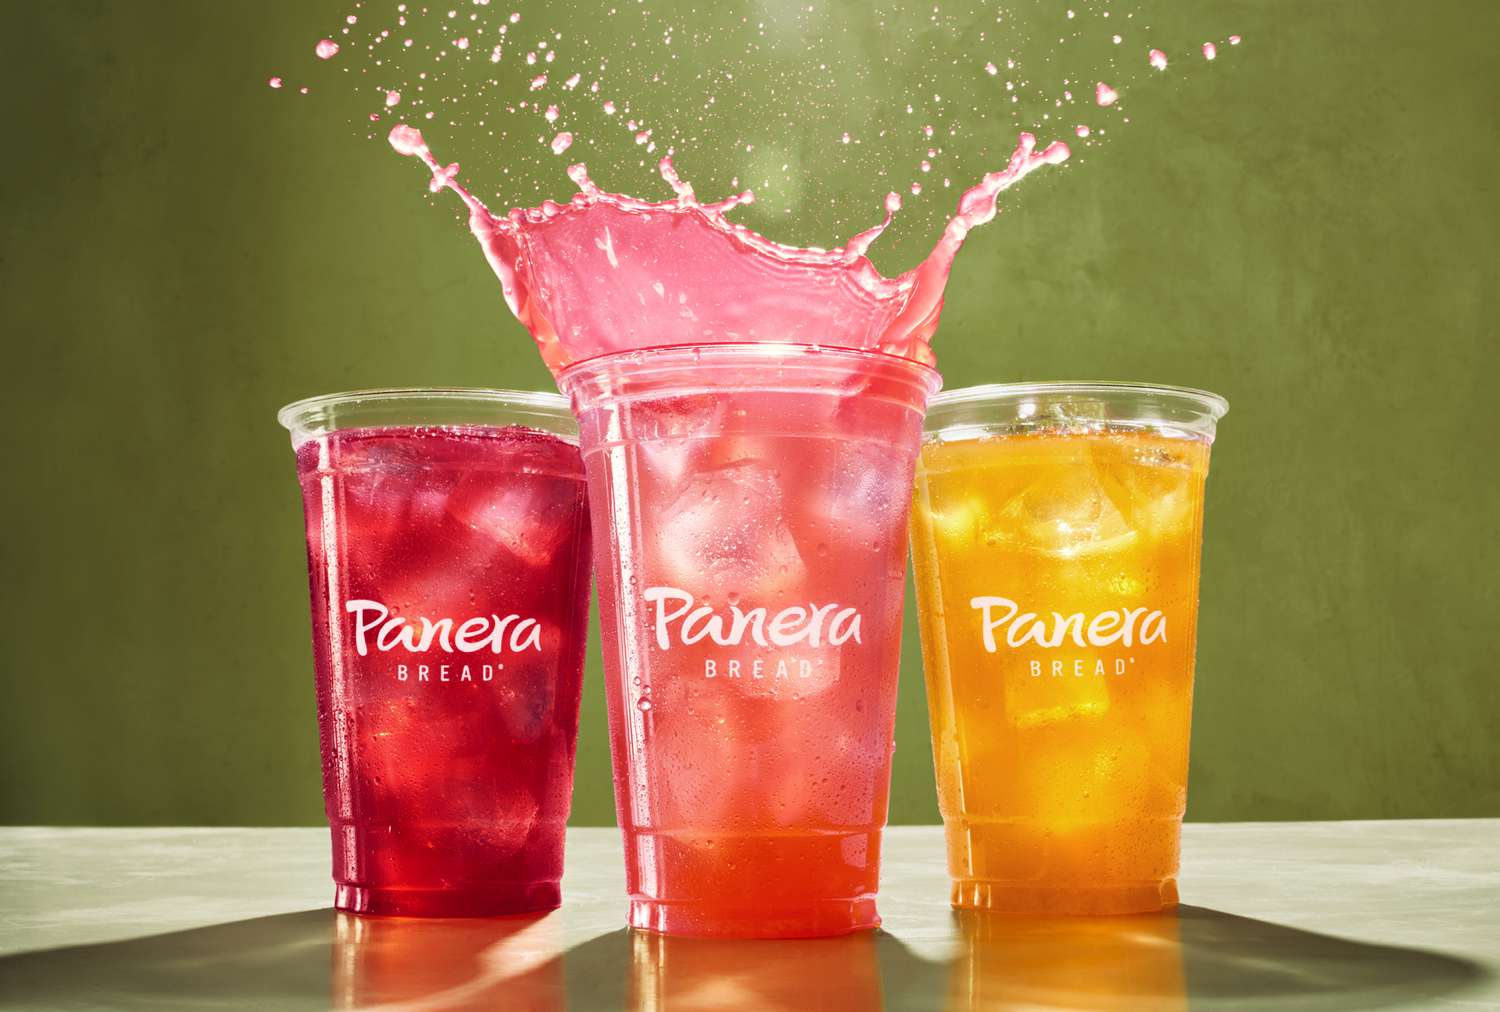 Panera Cuts Off Its Charged Lemonade Sale Because of Safety and Legal Concerns